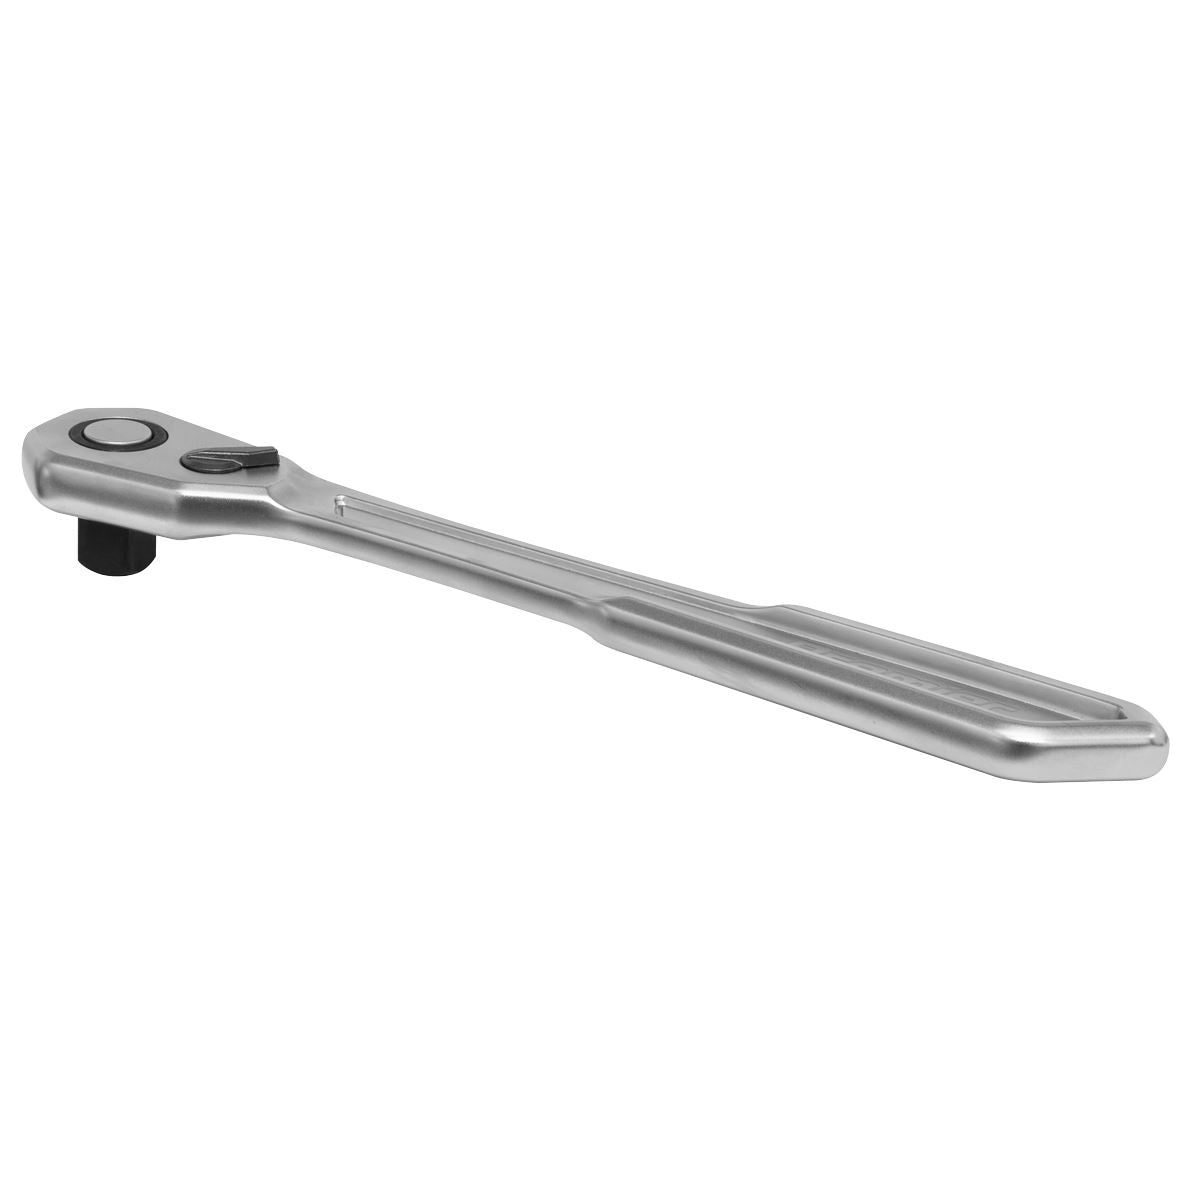 Sealey Premier Ratchet Wrench Low Profile 1/2" Drive Flip Reverse 90 Tooth